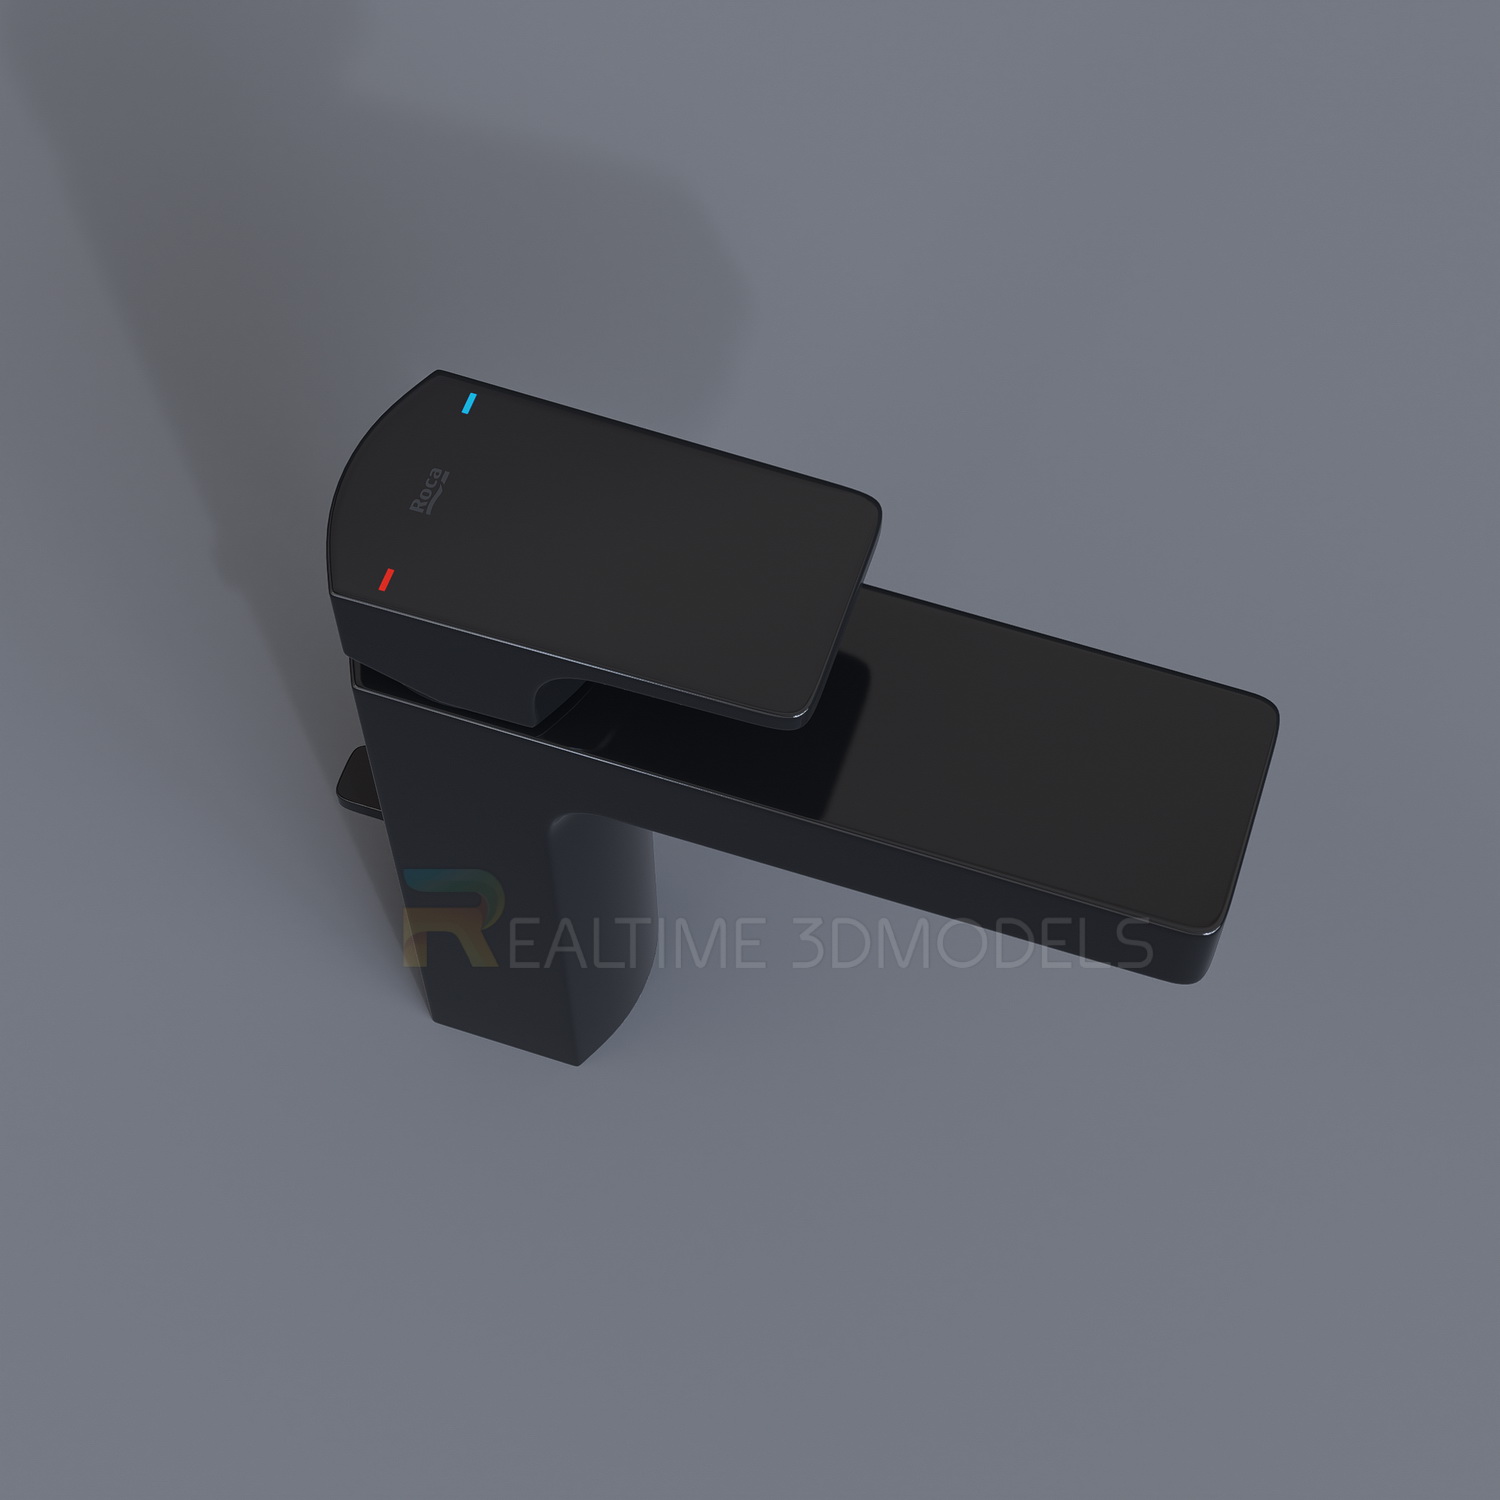 Realtime3d-00978